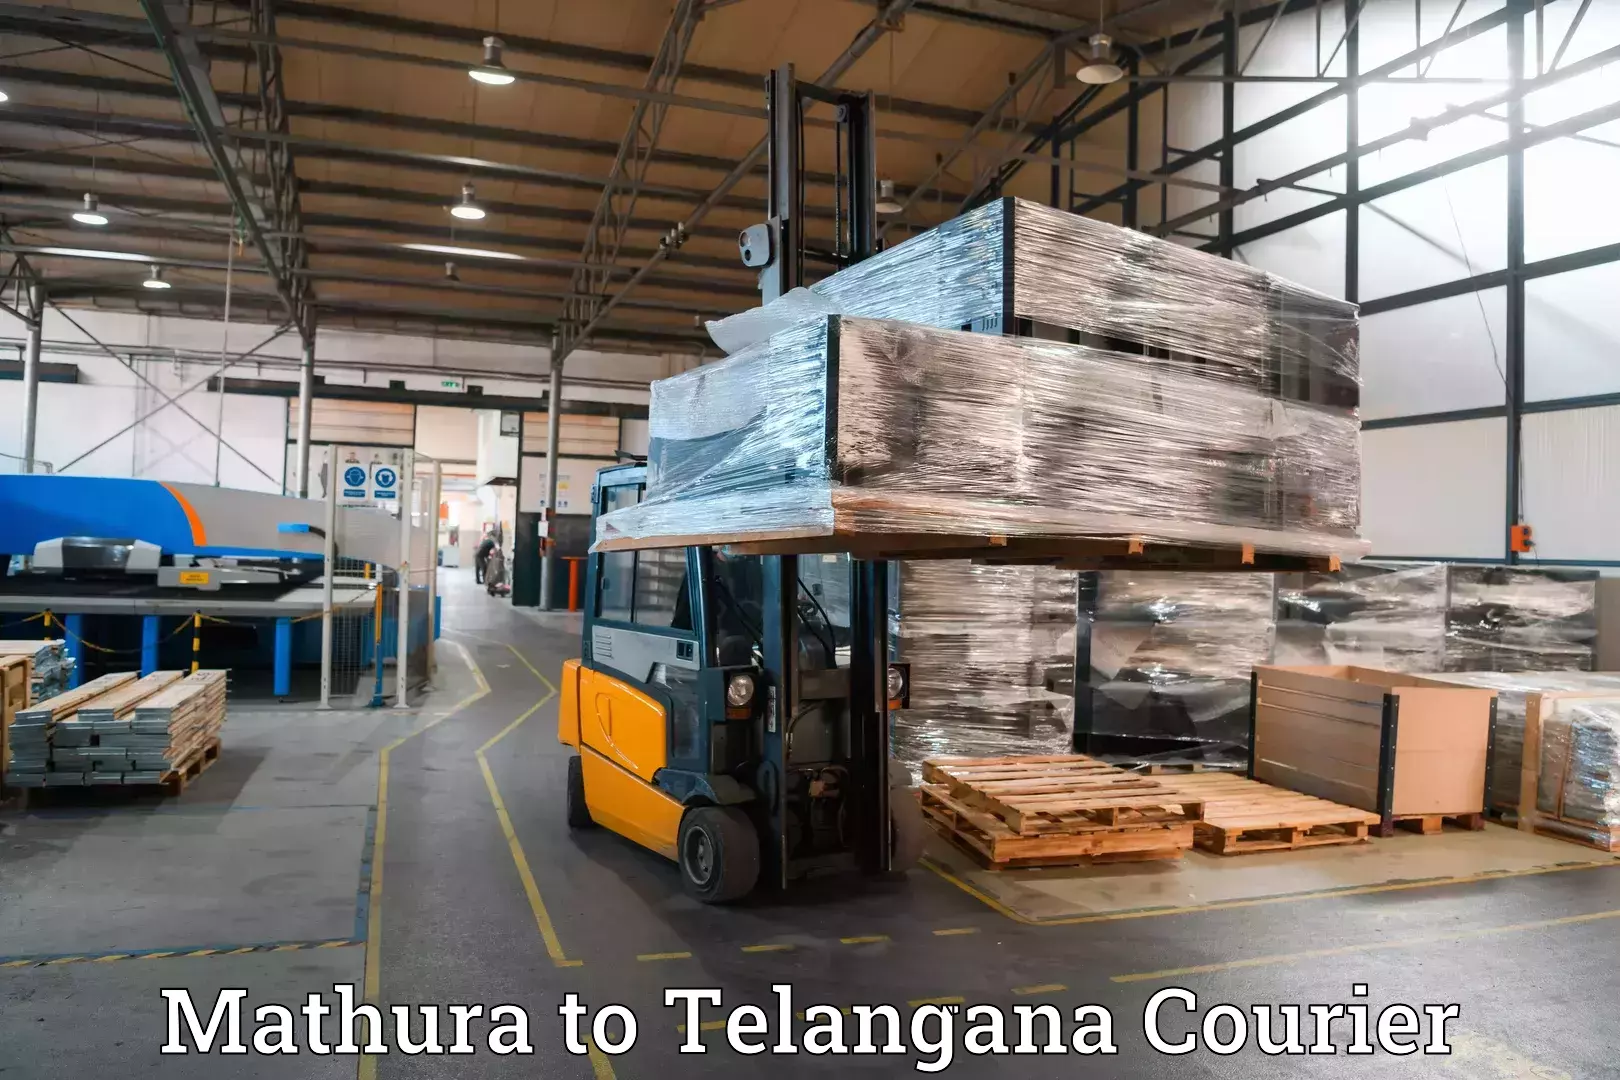 Luggage transport consultancy in Mathura to Bejjanki